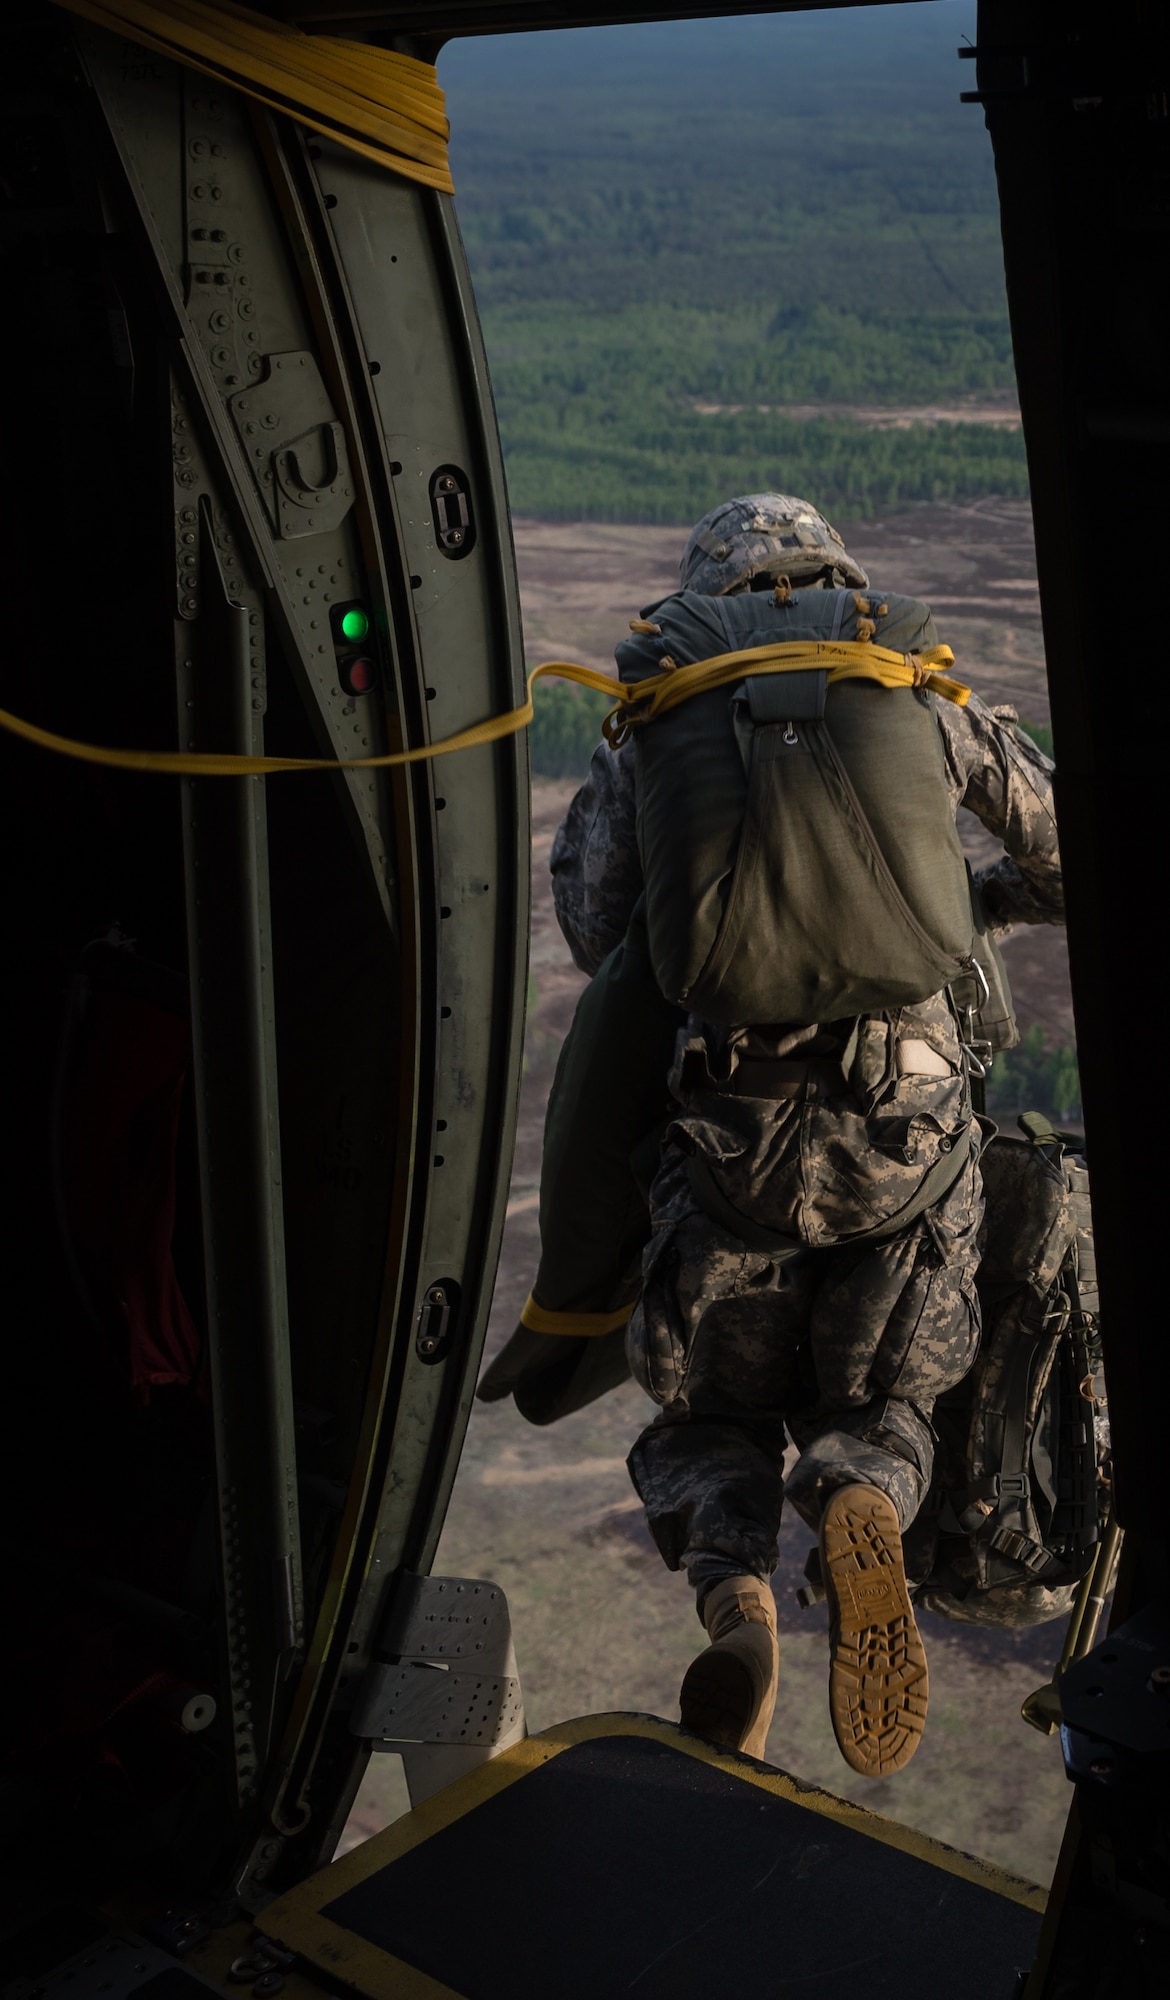 A U.S. Army paratrooper jumps from a 37th Airlift Squadron C-130J Super Hercules over Lithuania, May 17, 2014. Pilots and loadmasters from the 37th AS, alongside an 86th Aircraft Maintenance flying crew chief spent four days across three Baltic countries assisting in personnel drops of allied partners and American service members. (U.S. Air Force photo/Airman 1st Class Jordan Castelan)